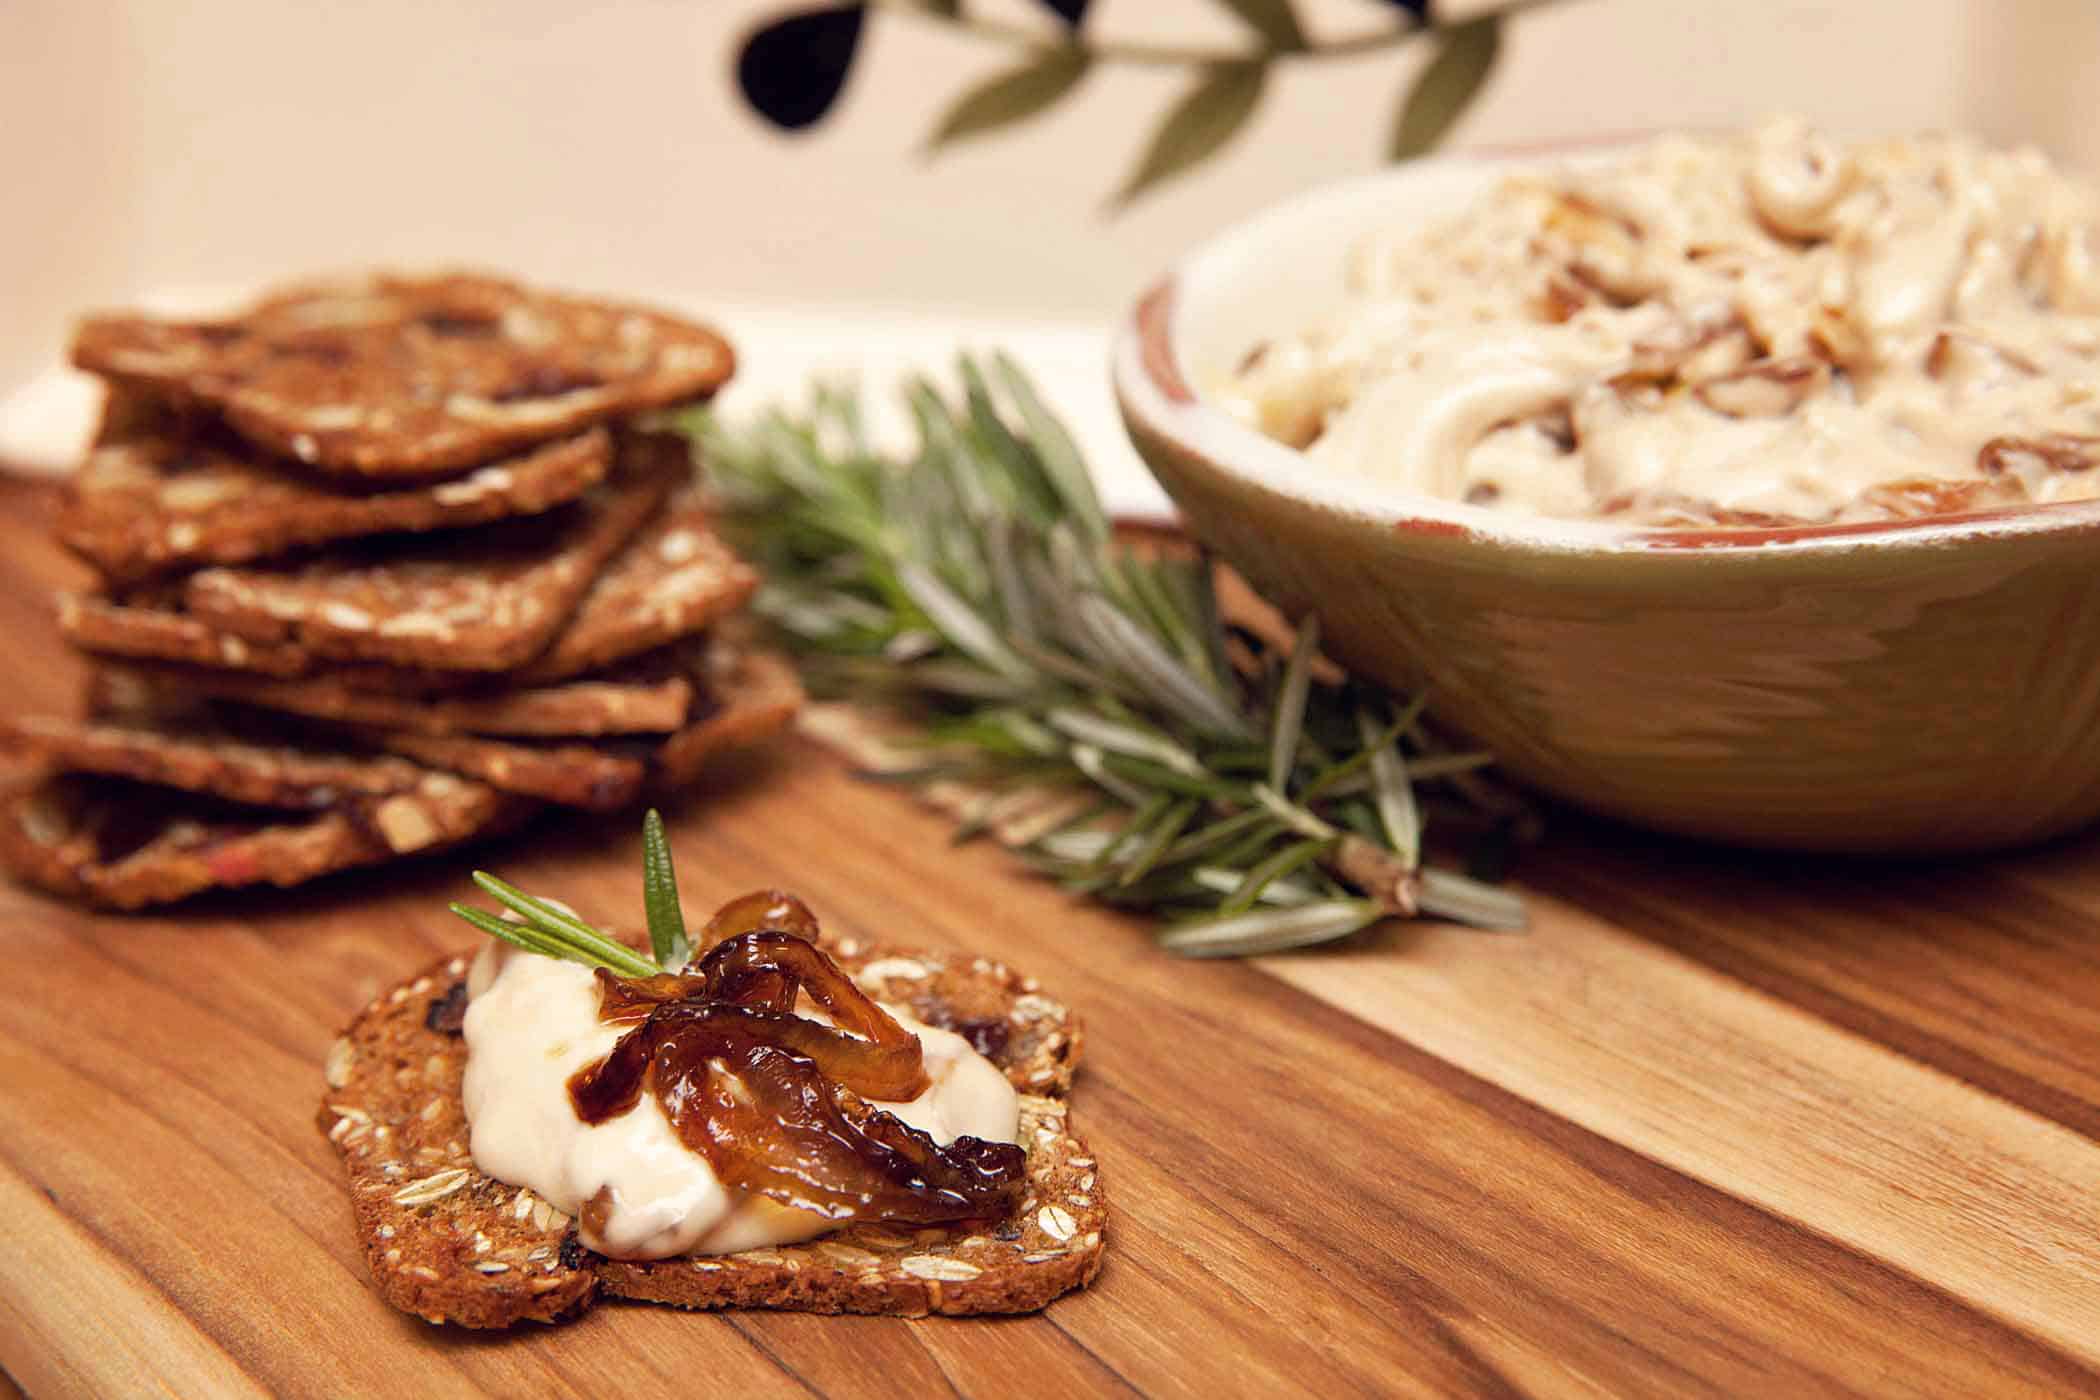 Caramelized onion & blue cheese dip on a whole grain cracker on a cutting board